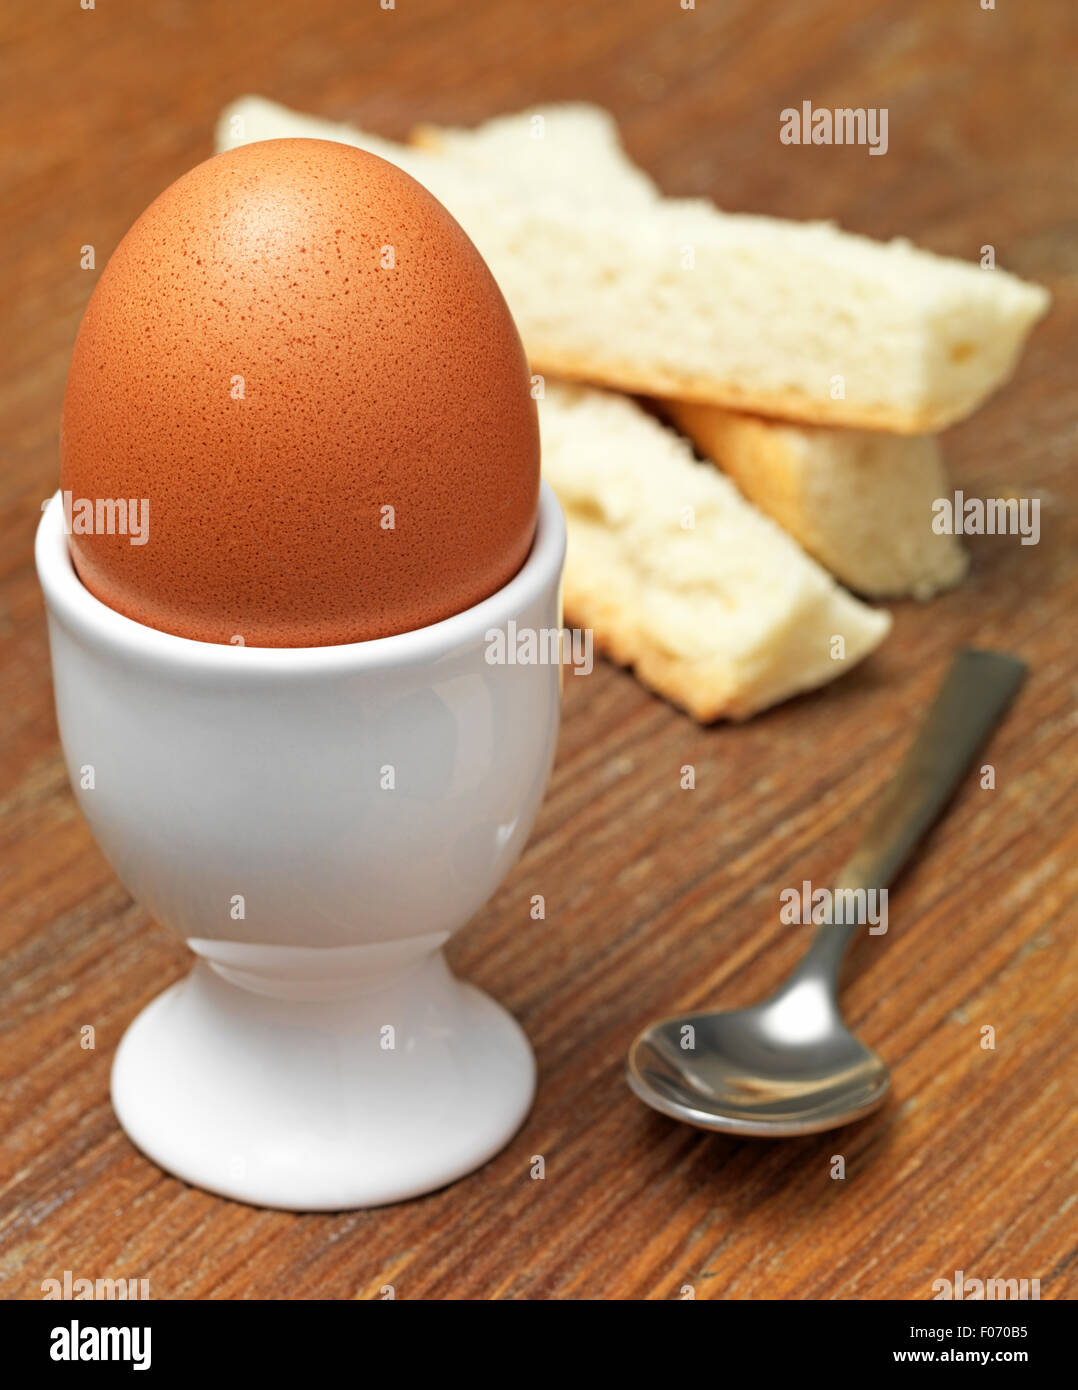 Boiled Egg on wooden Table Stock Photo